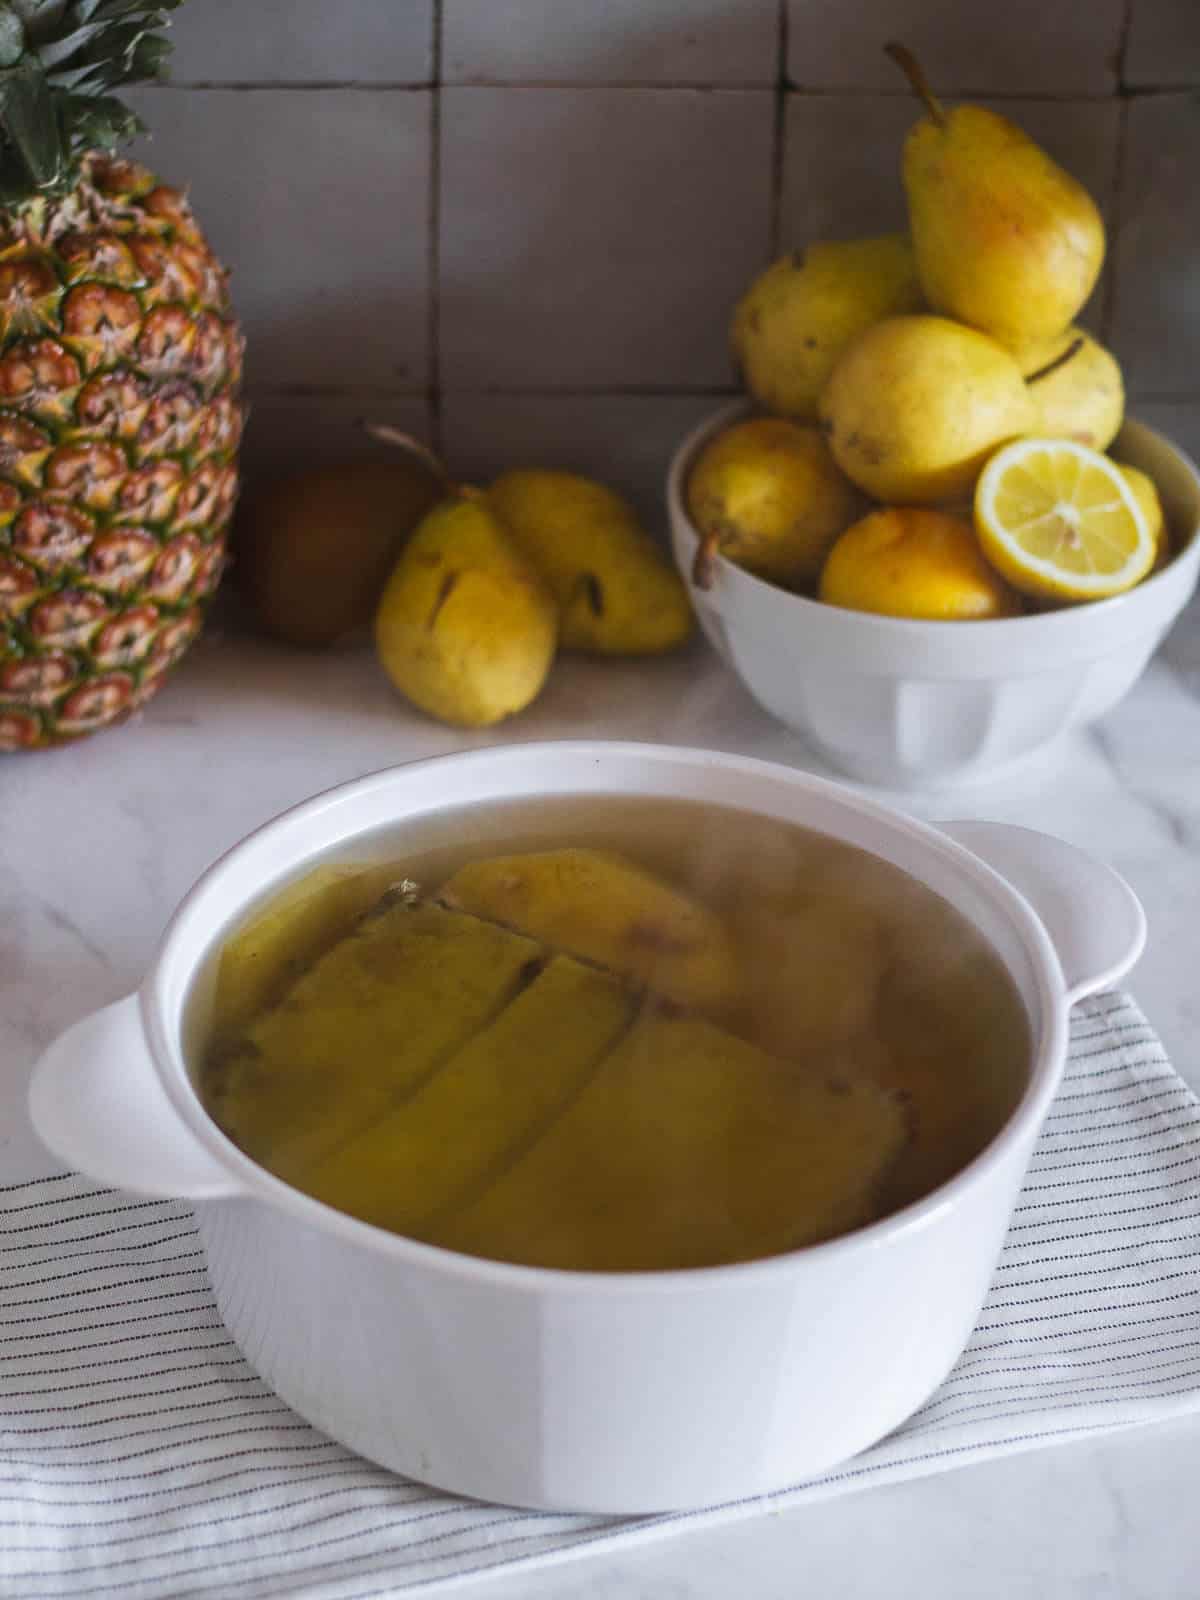 cooldown the pineapple-infused water